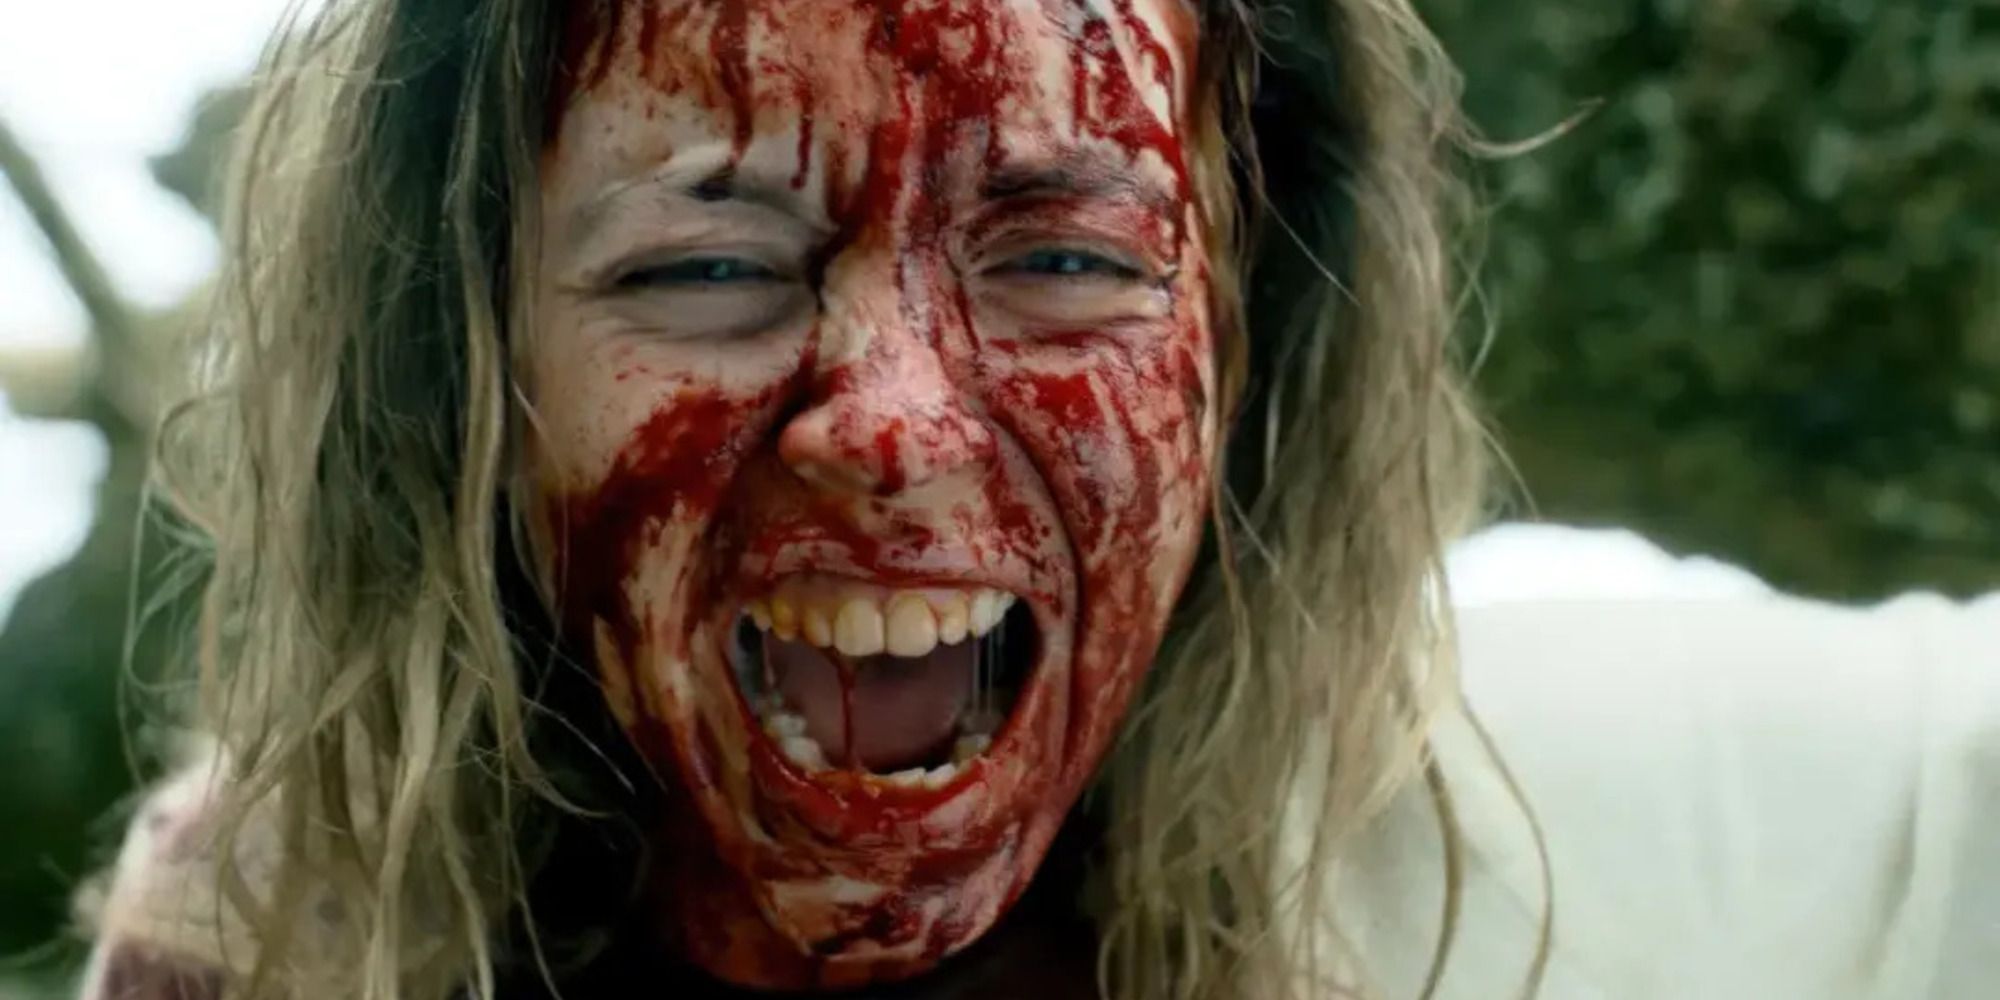 Immaculate Sydeny Sweeney with her face covered in blood, screaming